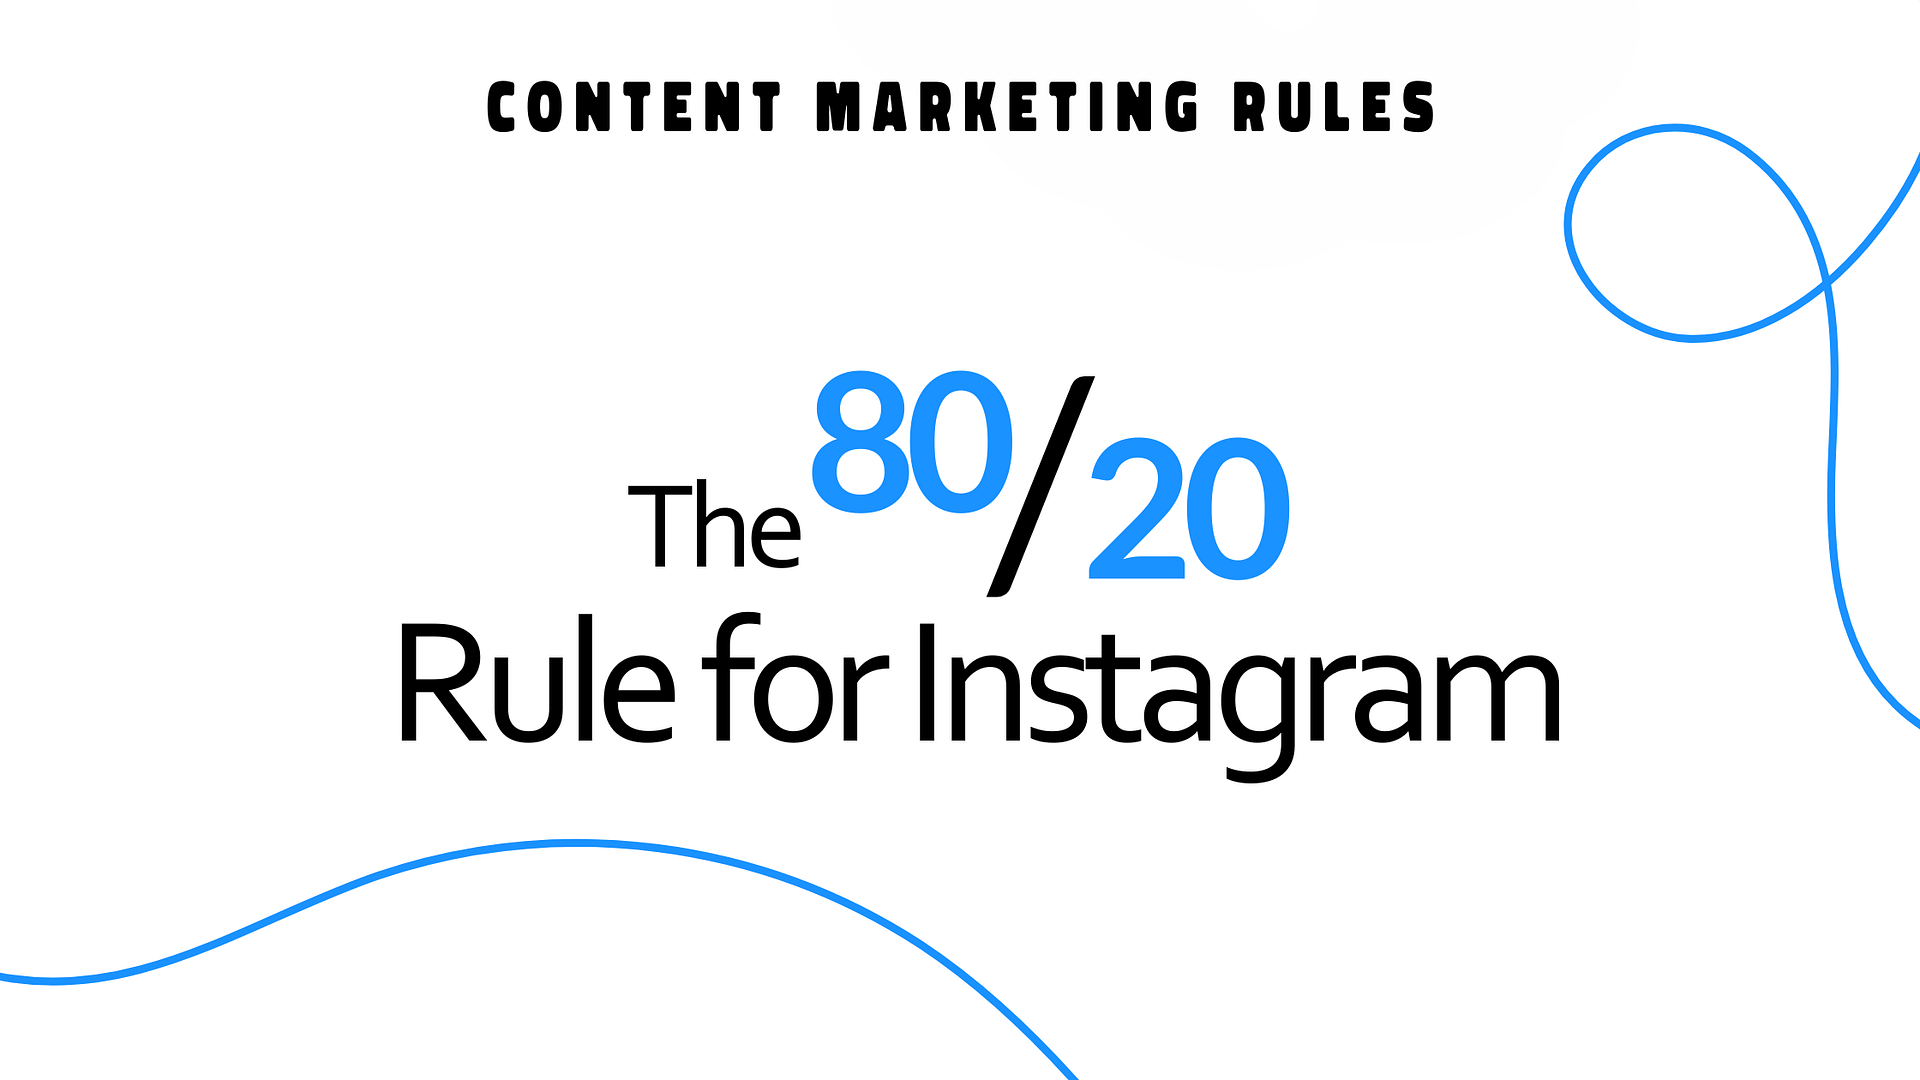 Content marketing rules: The 80/20 rule for Instagram